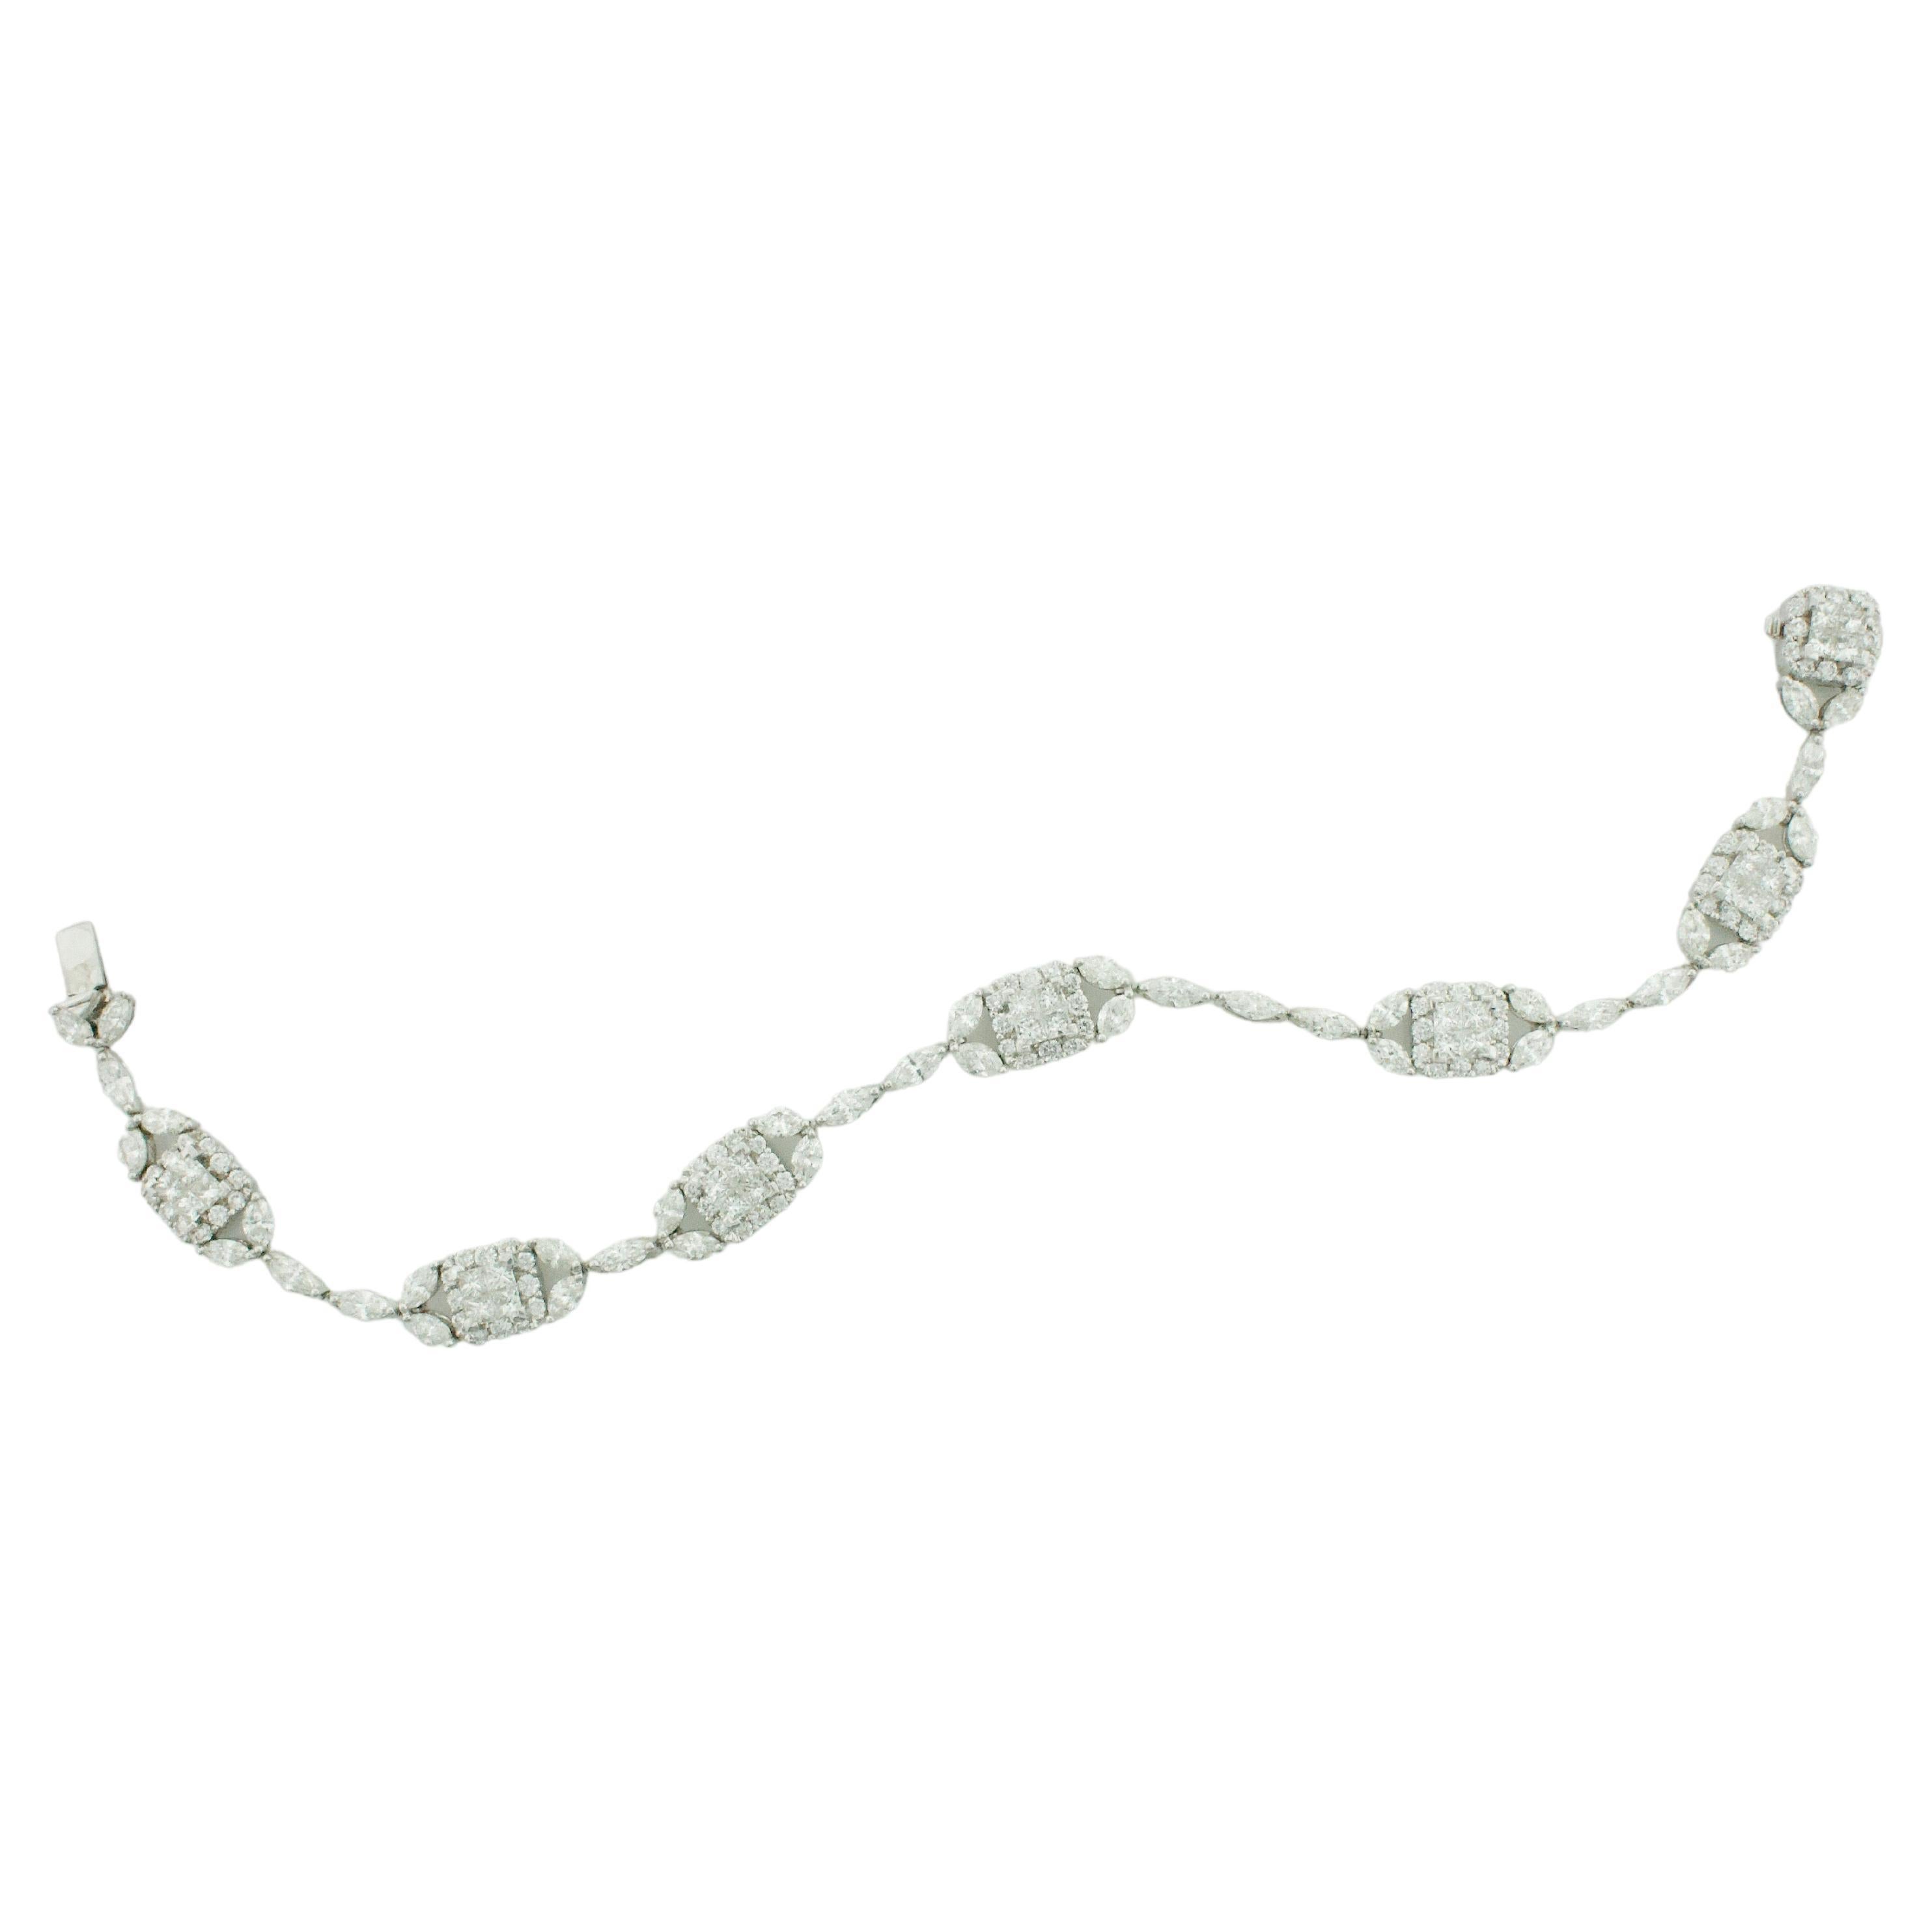 Diamond Bracelet by "Greg Ruth" in 18k White Gold 6.75 Carats For Sale